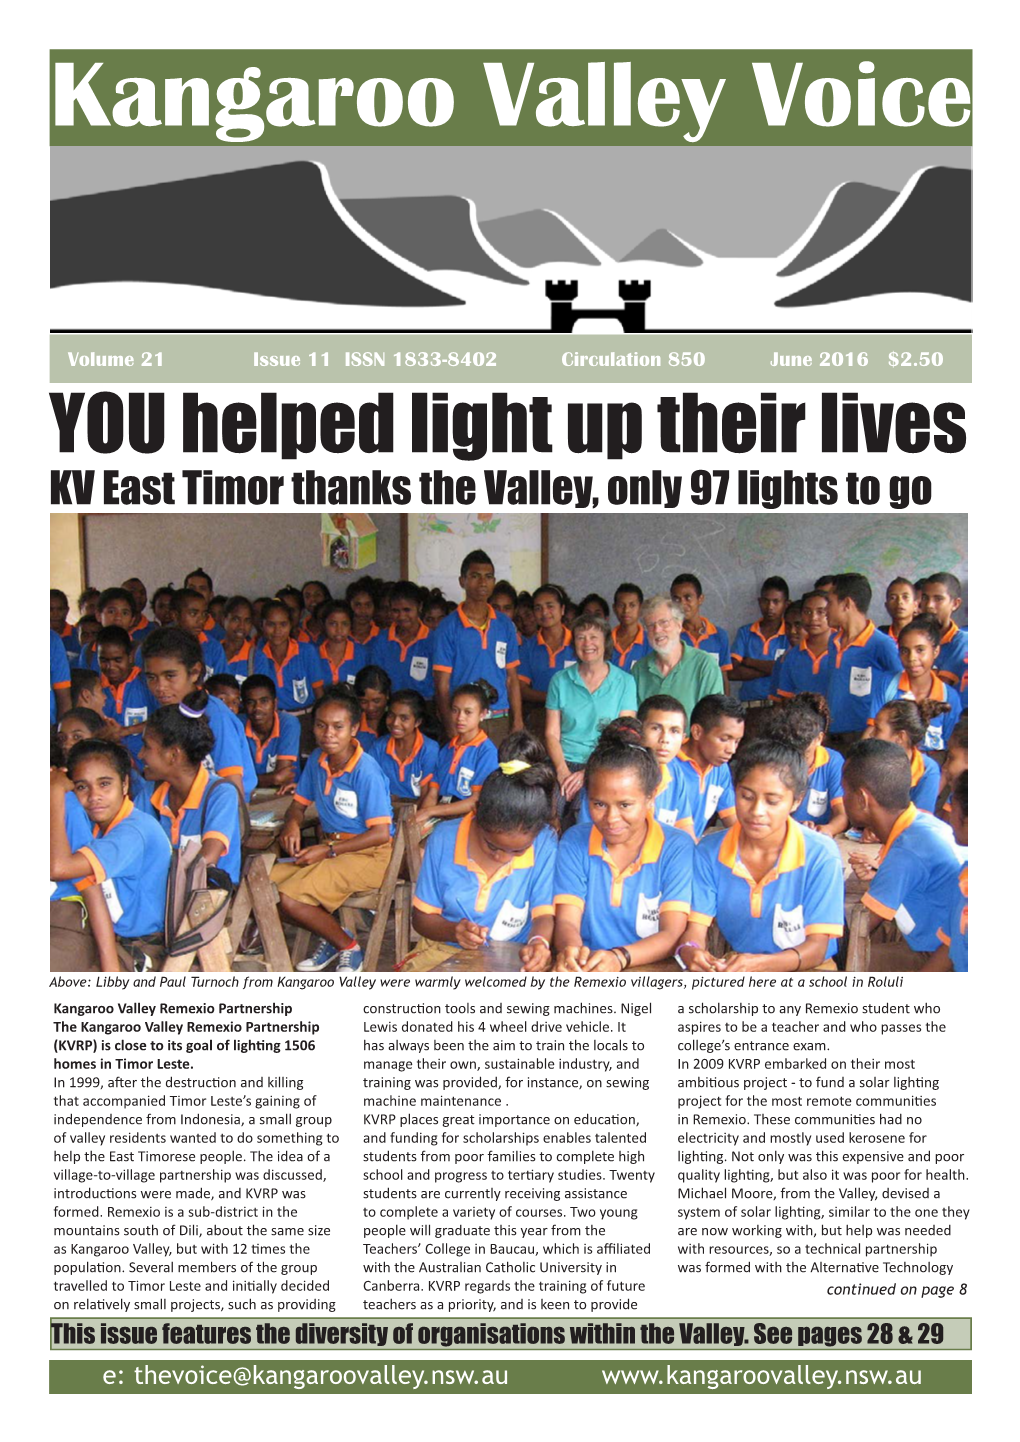 June 2016 $2.50 YOU Helped Light up Their Lives KV East Timor Thanks the Valley, Only 97 Lights to Go